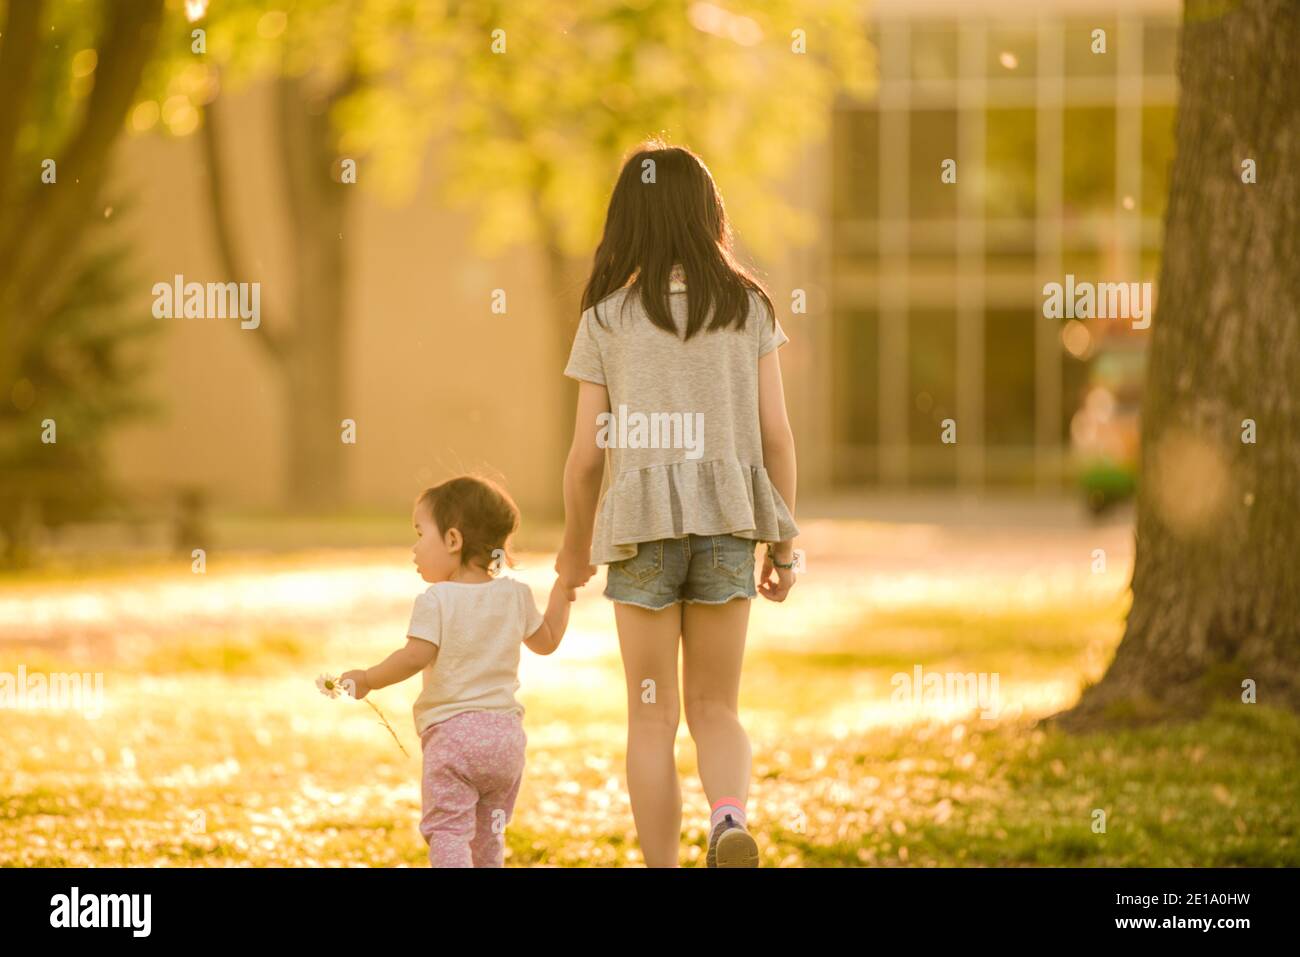 Longueuil, Canada - August 15 2020: Sisters hand in hand walking in the forest in a summer afternoon Stock Photo